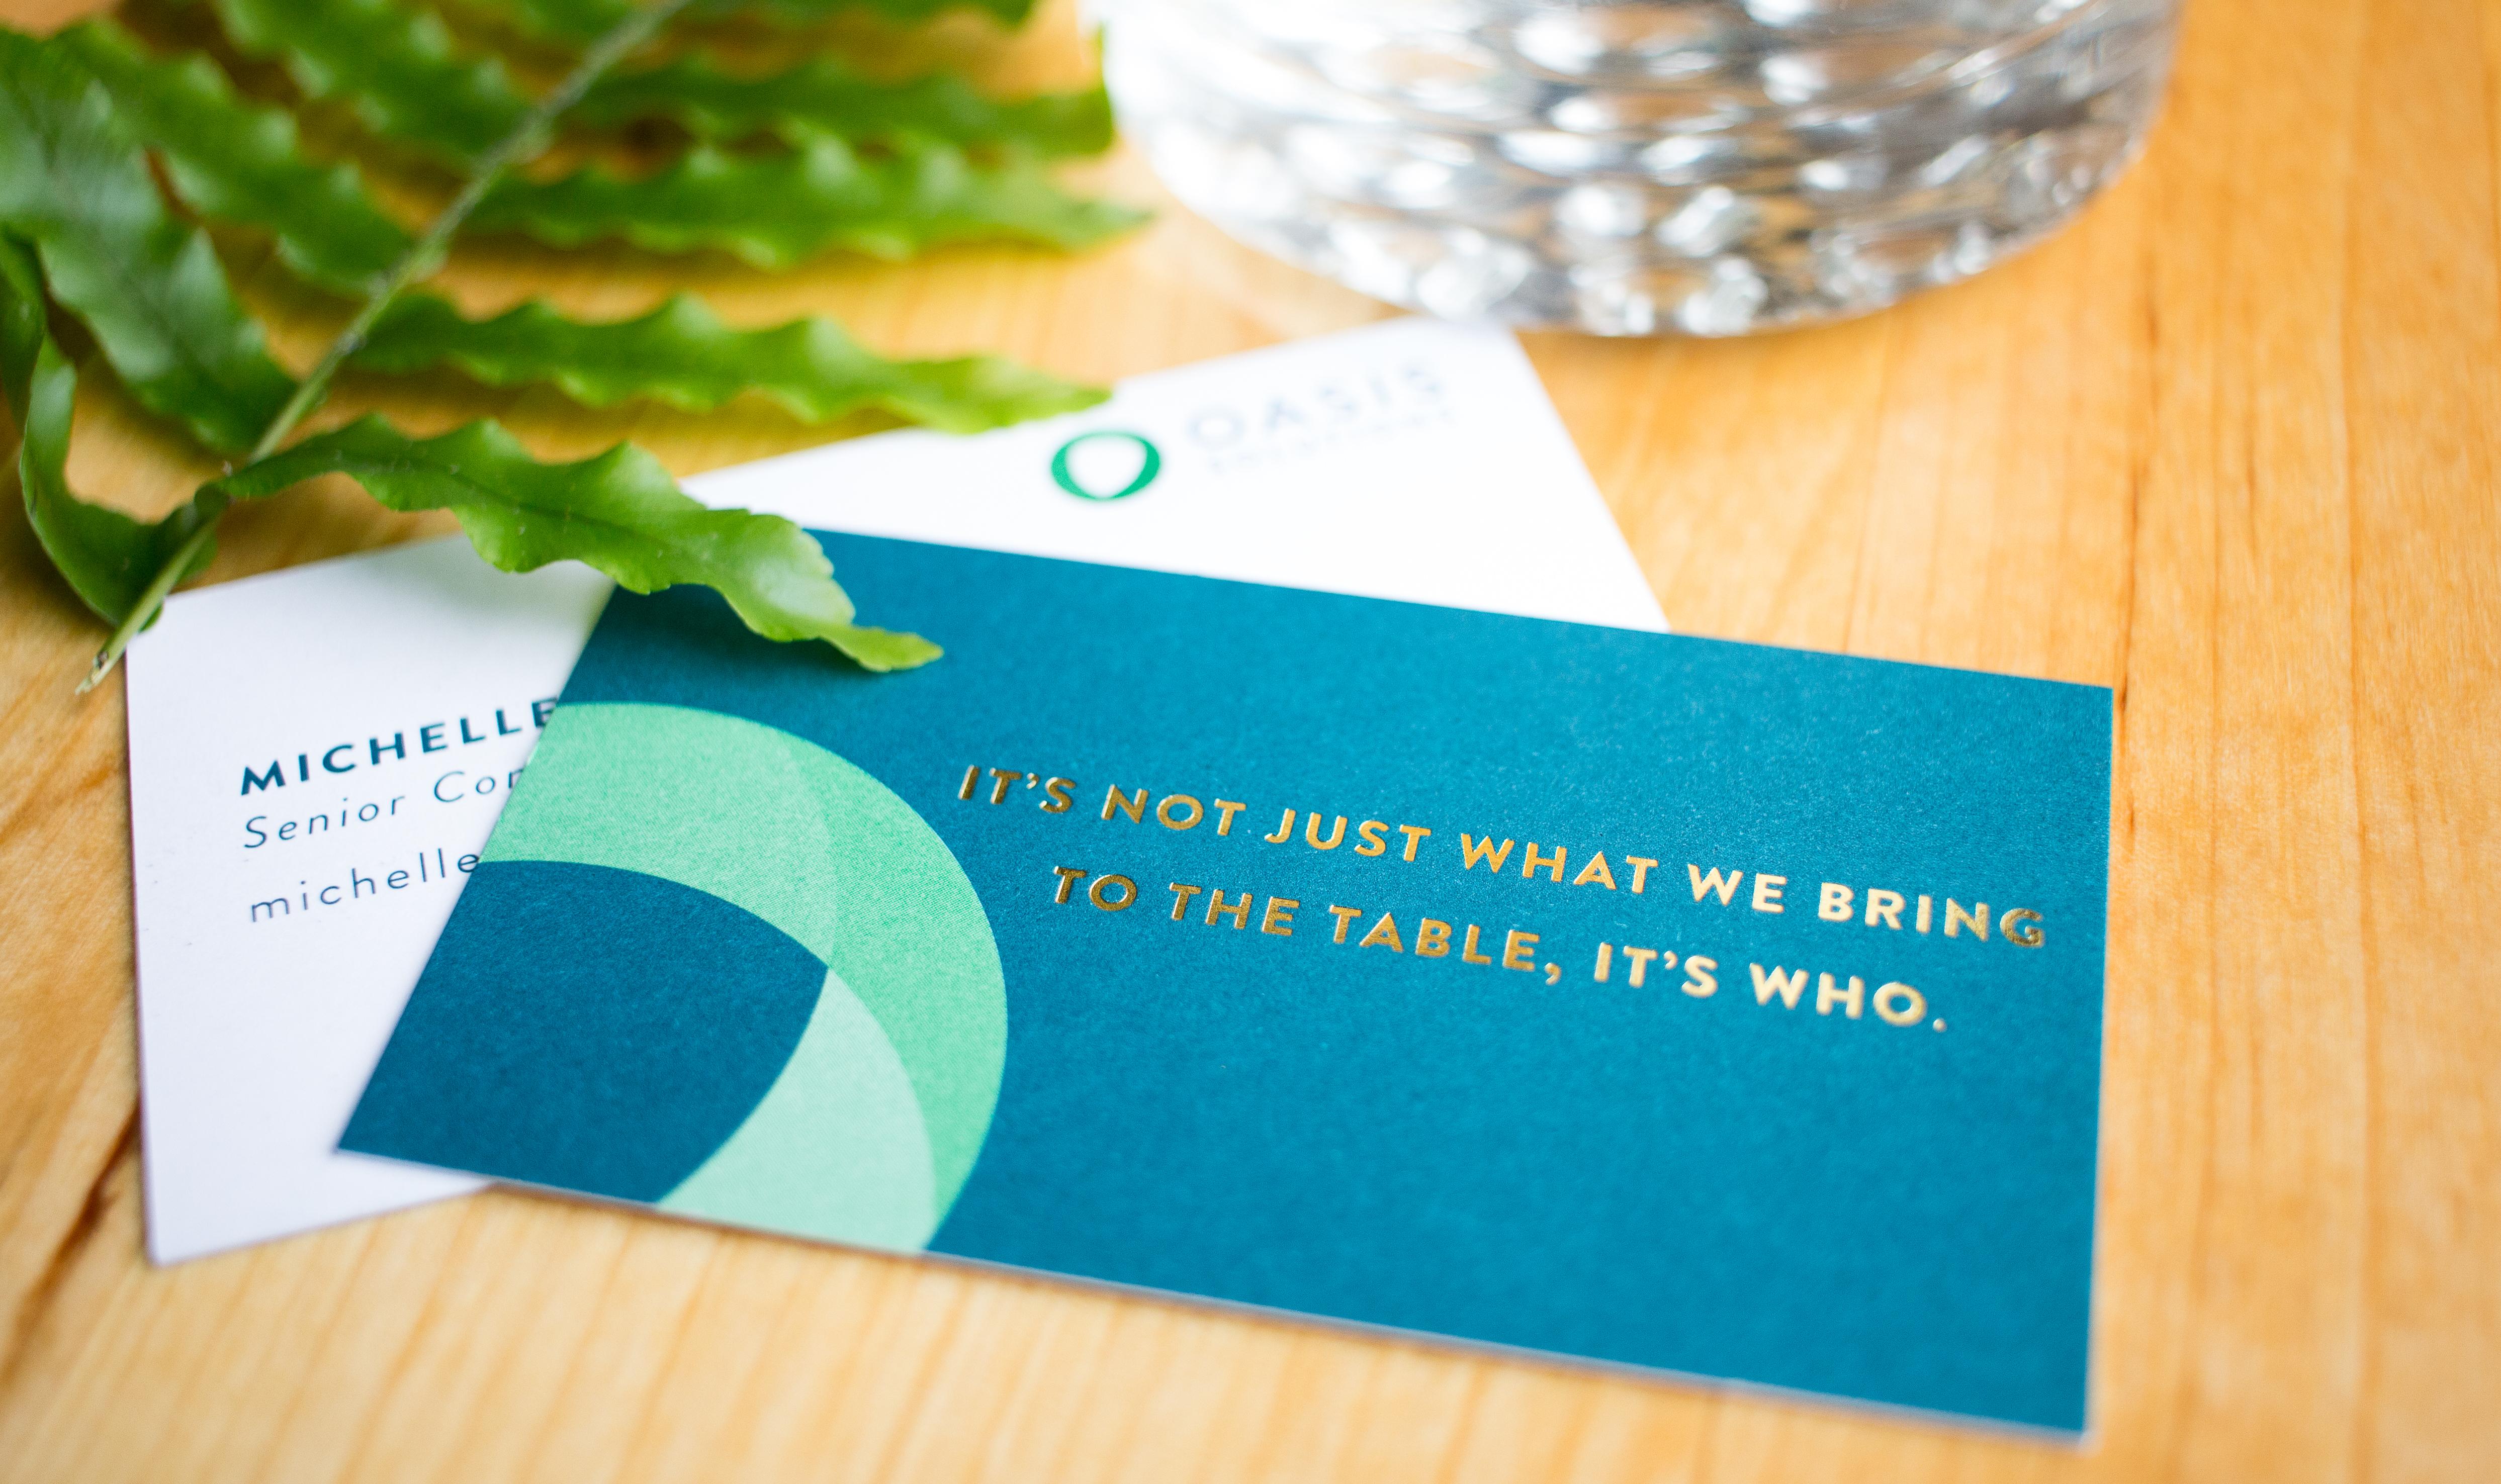 "It's not just what we bring to the table, it's who" Oasis business card.